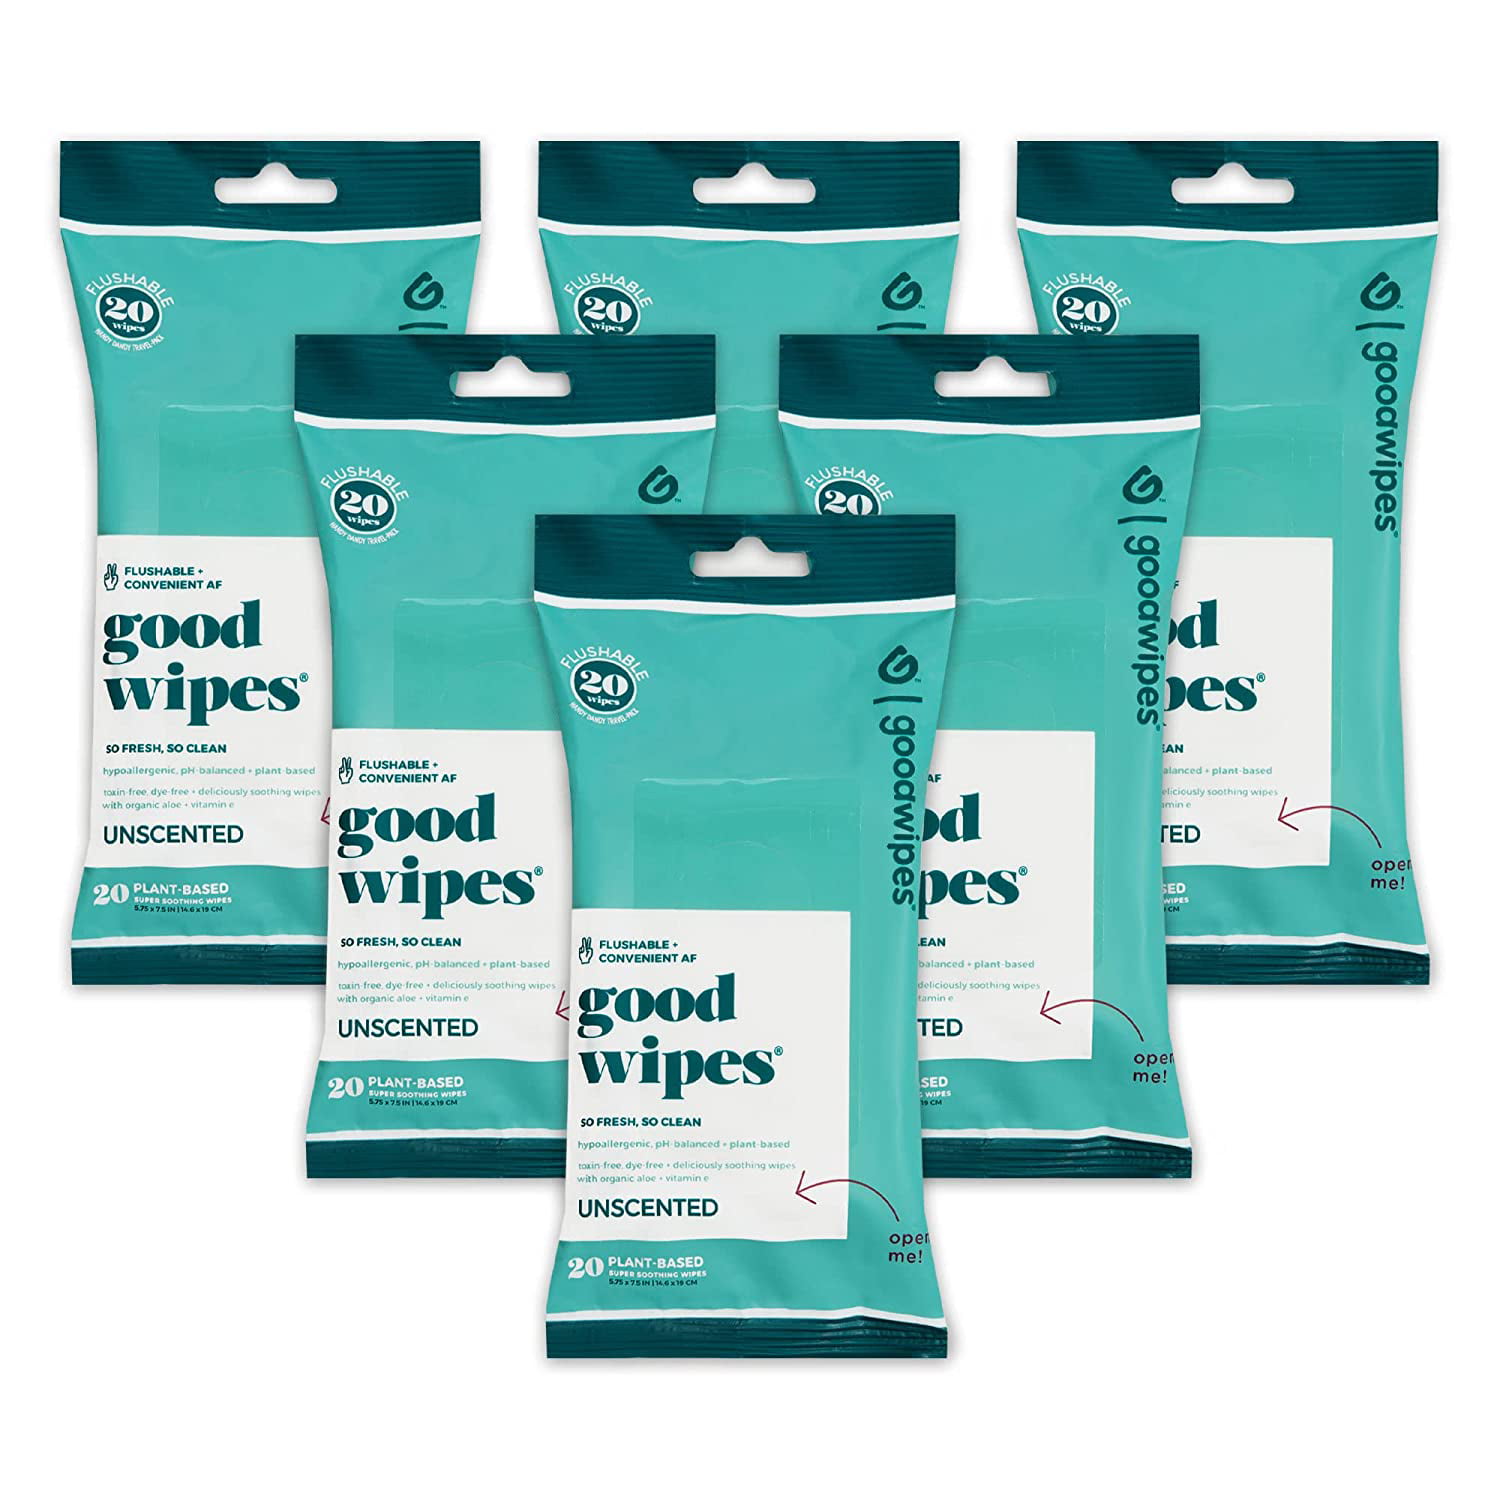 Vitamin E and Chamomile 100% Biodegradable Dispenser Pack 1 Pack 50 Count Goodwipes Flushable Men’s Cleansing Butt Wipes with Aloe